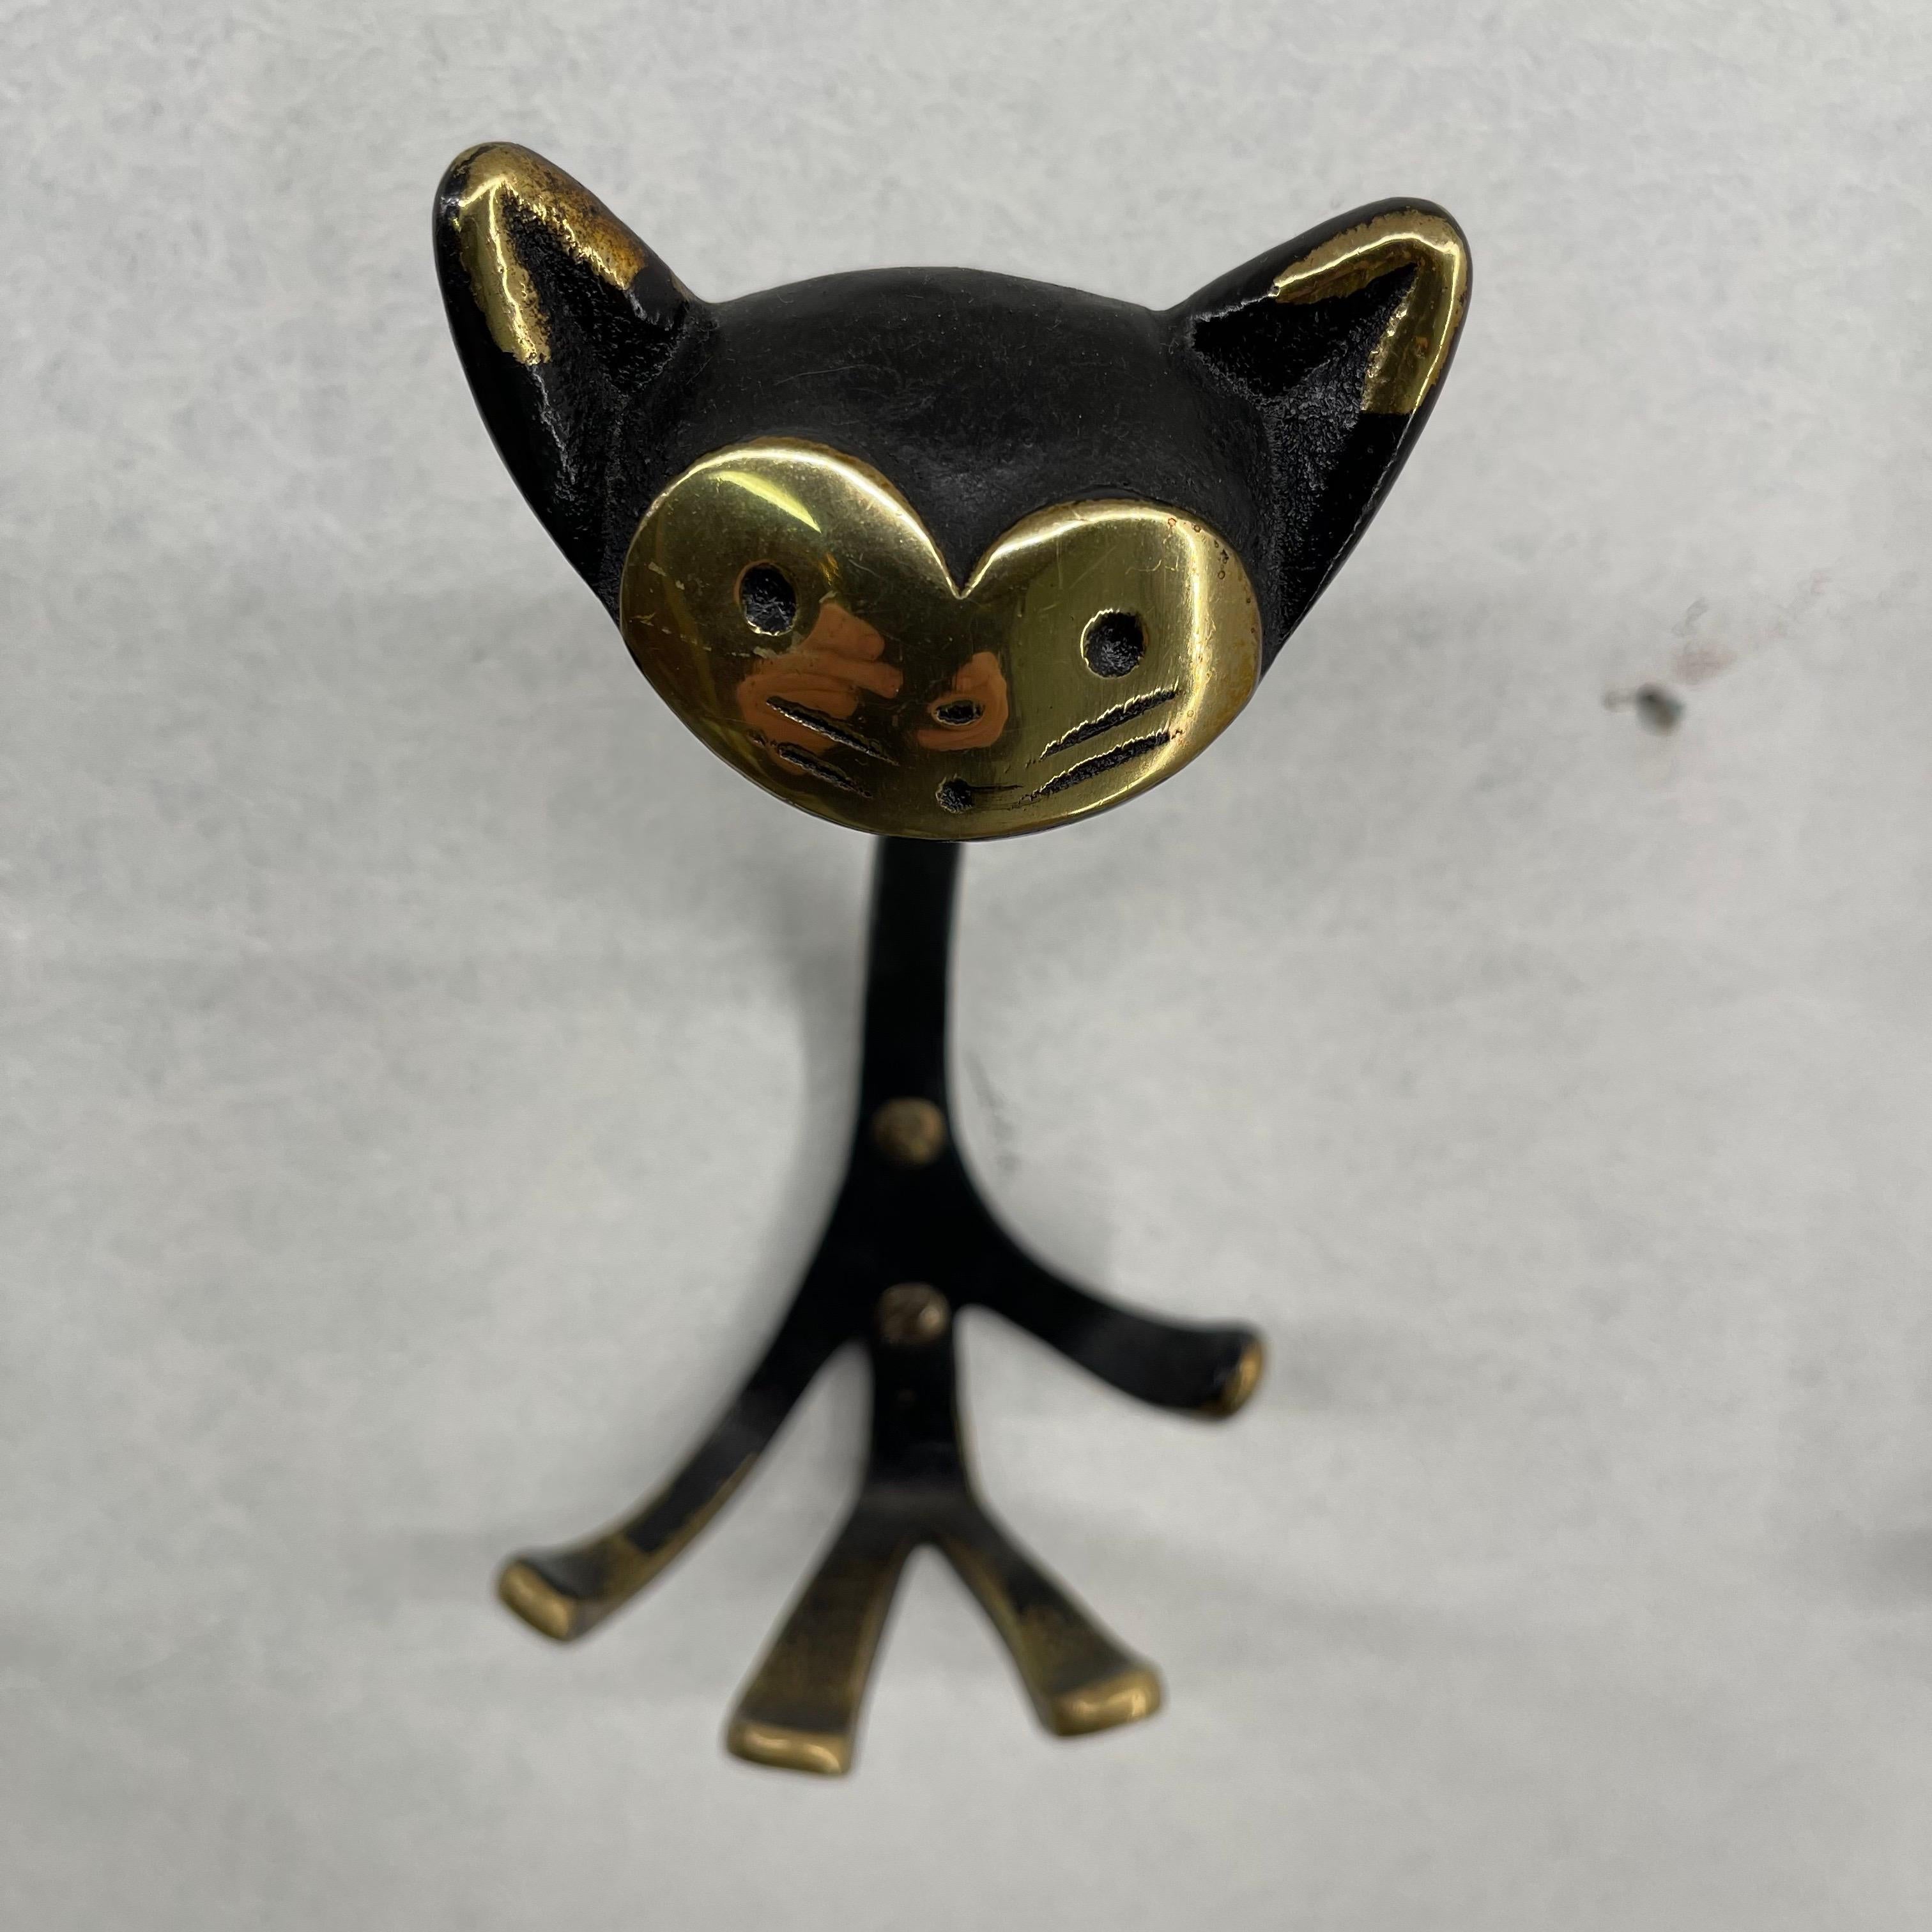 Blackened Walter Bosse Brass Wall Hooks Model 'Zoo', 6 Pieces Available, Austria 1950s For Sale